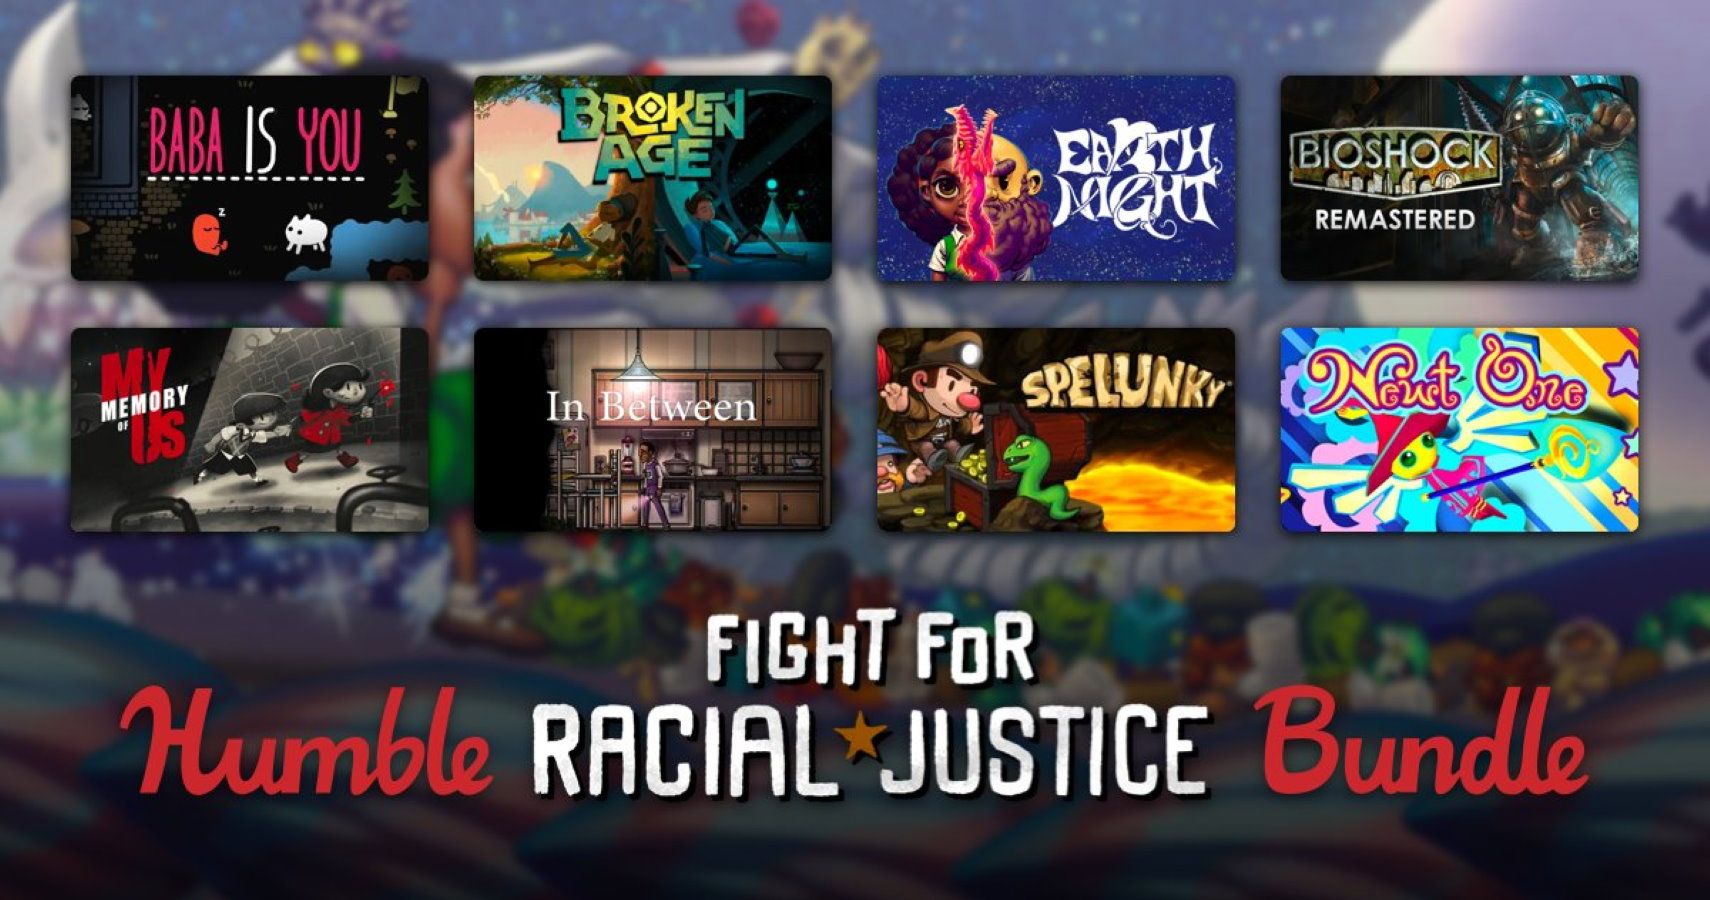 Get $1200 Worth of Games For Only $30 With Humble Bundles Fight For Racial Justice Bundle